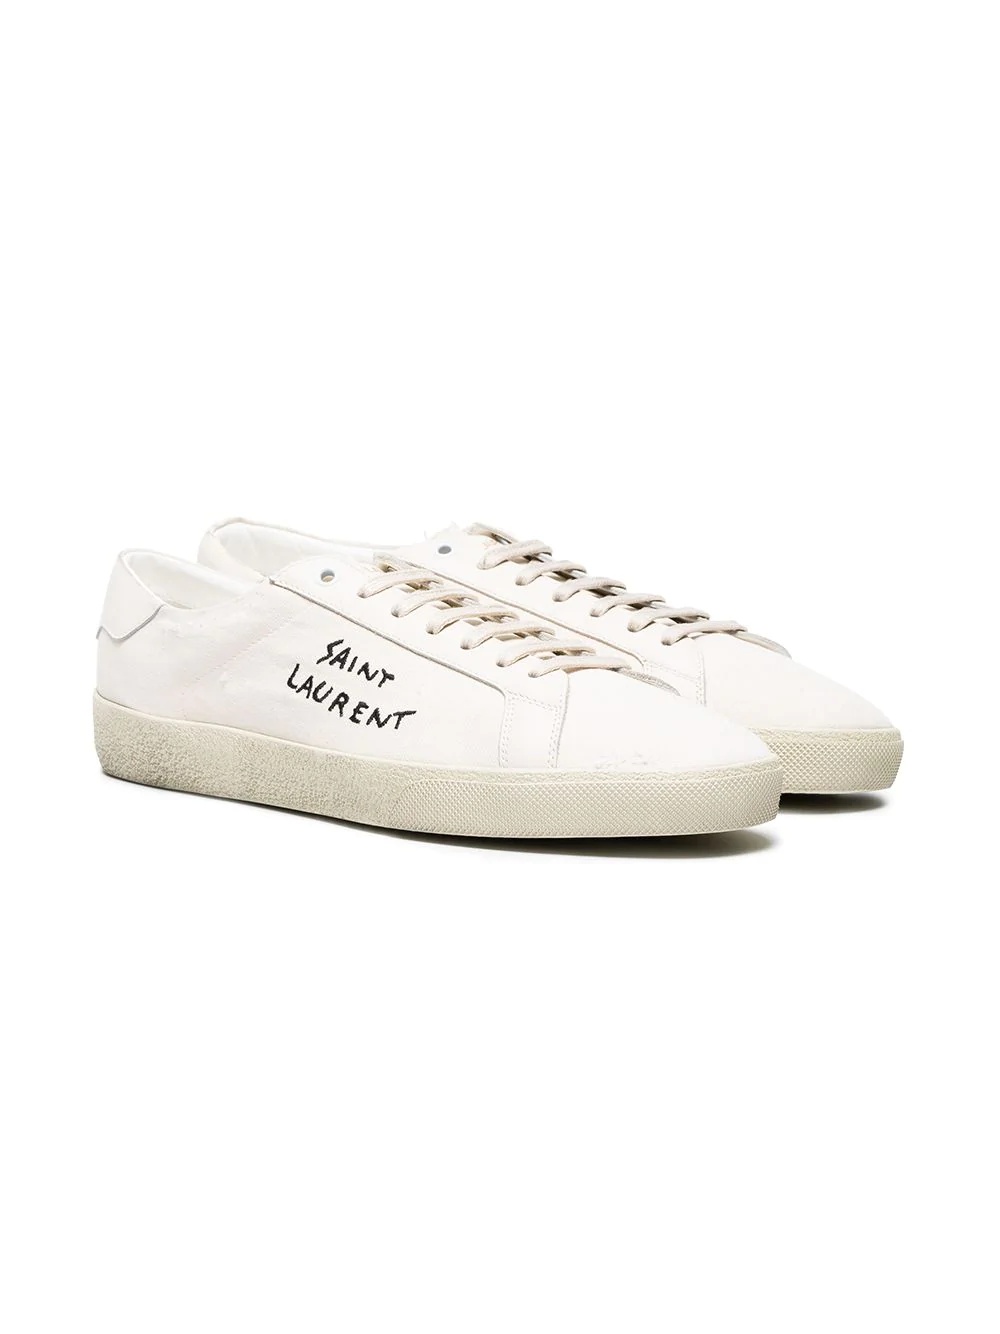 classic SL/06 embroidered sneakers - 3